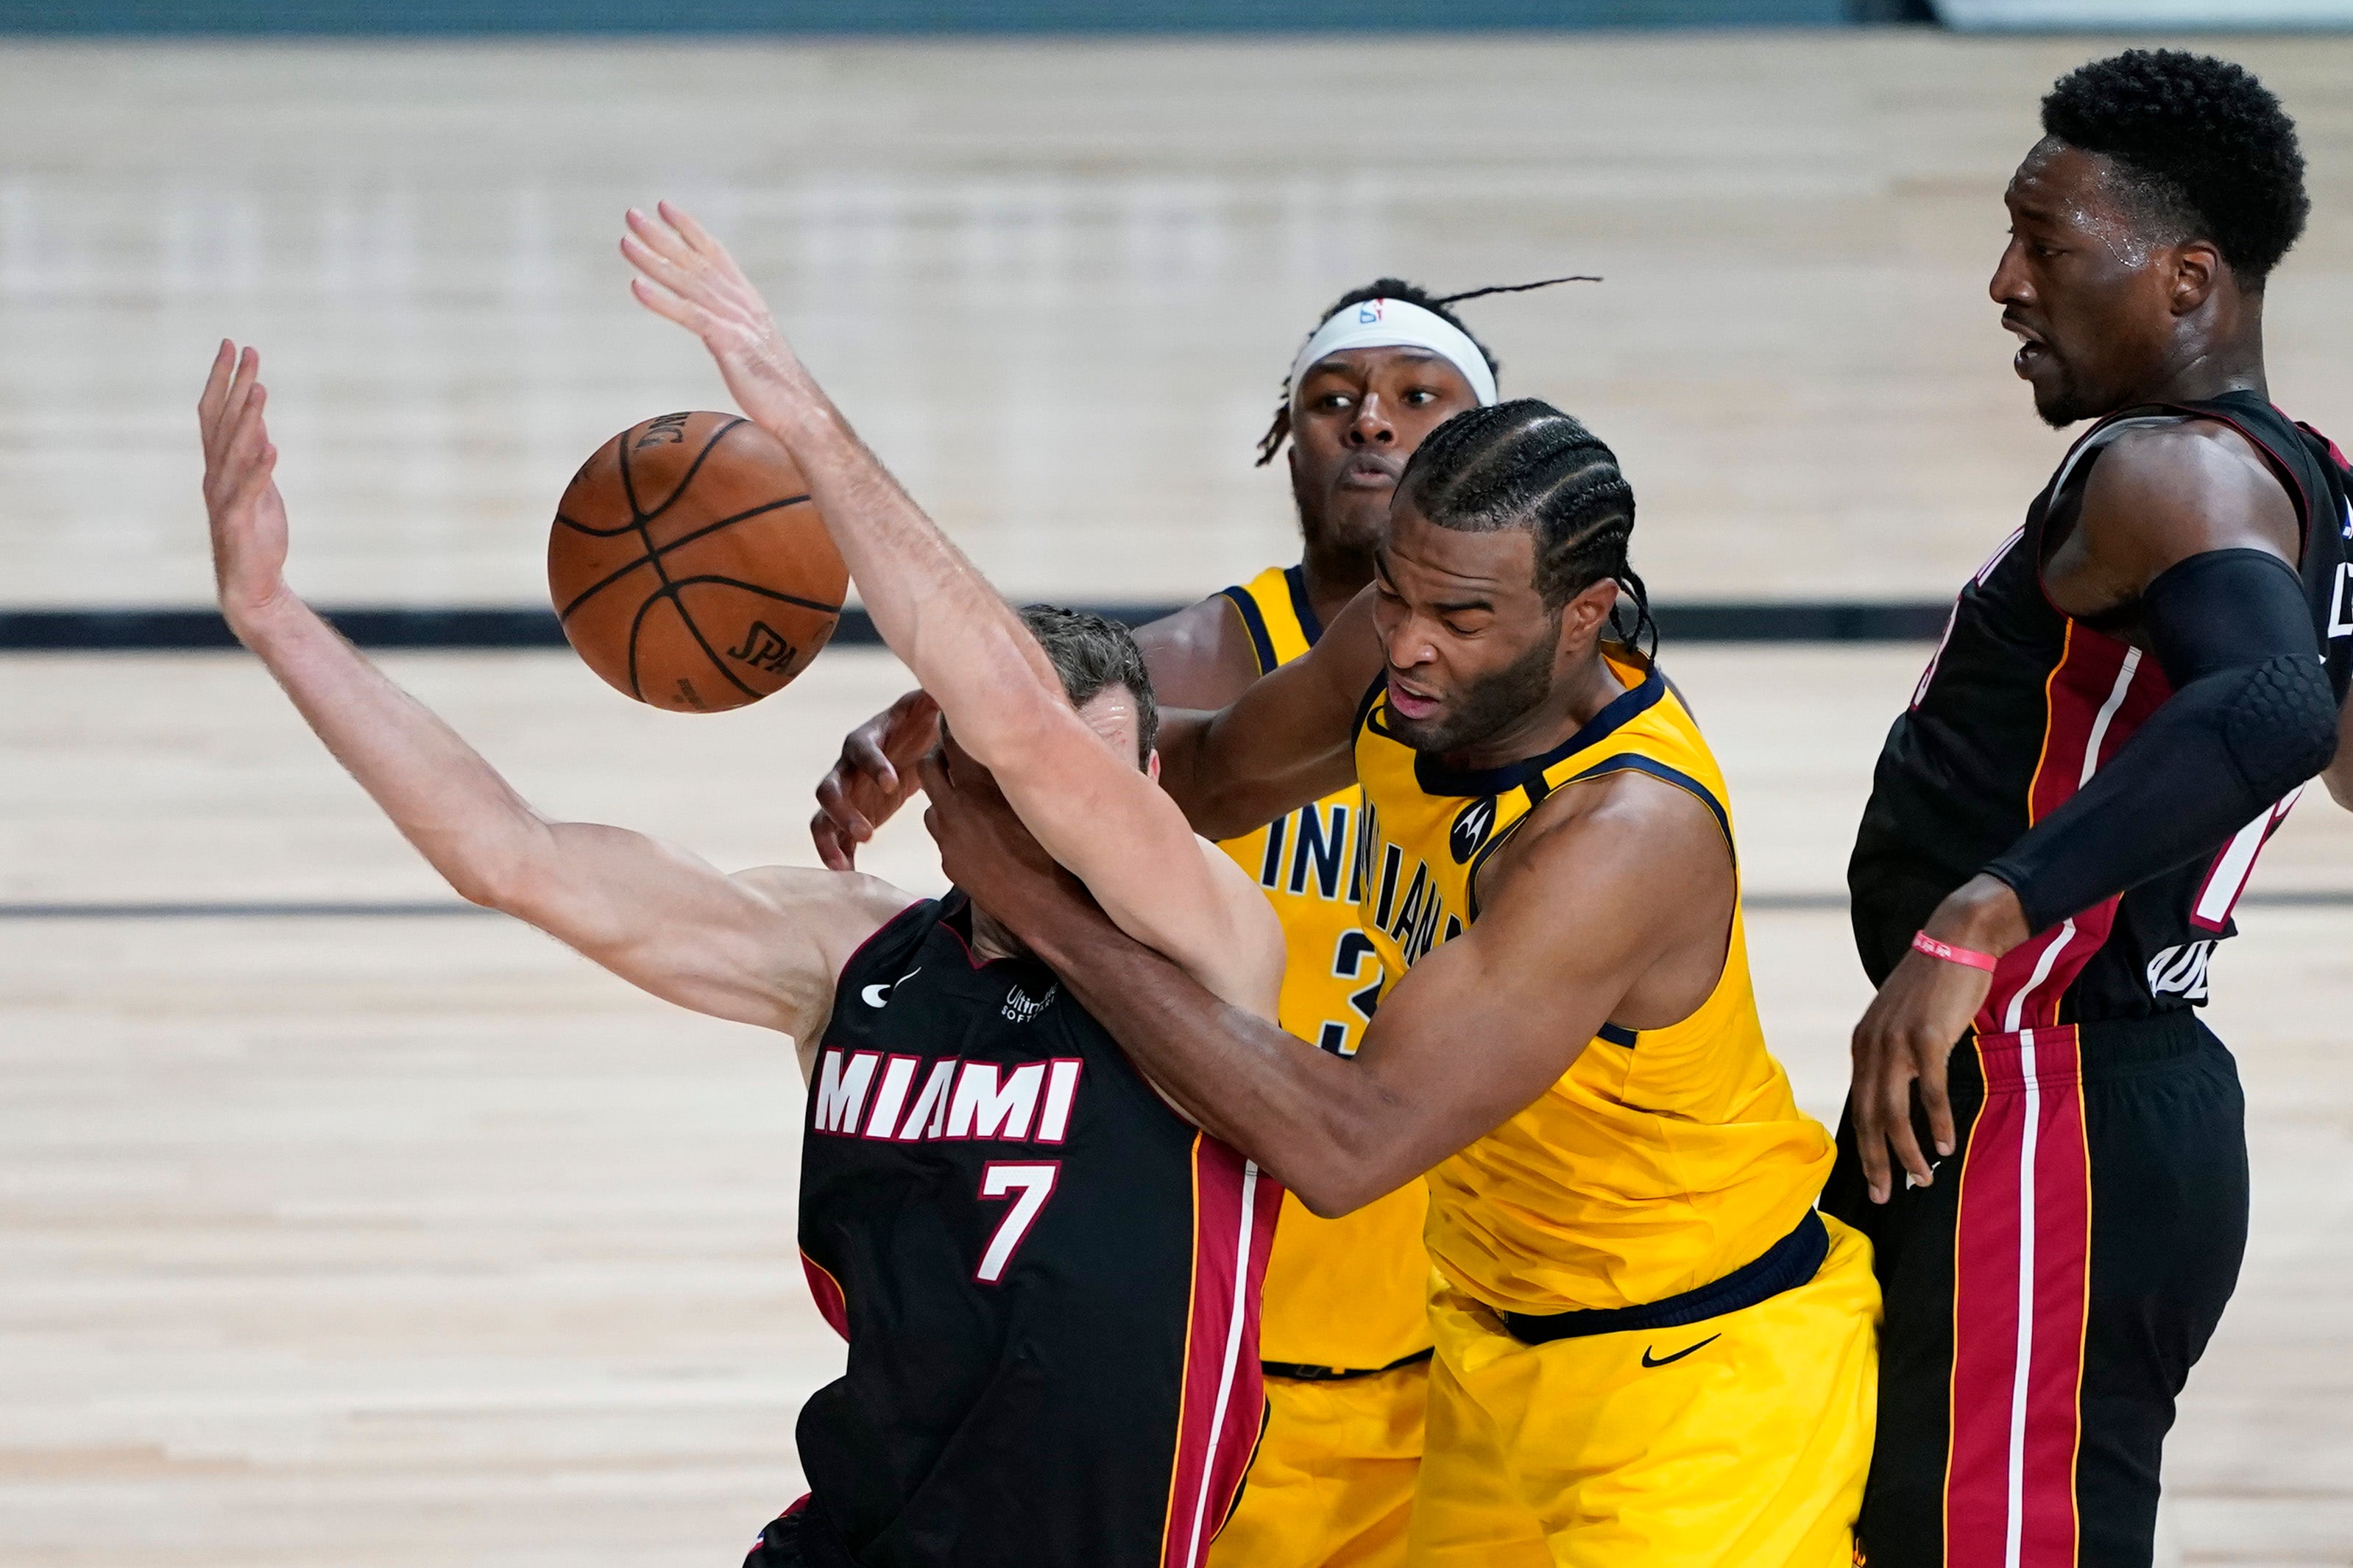 Miami Heat 113, Indiana Pacers 101